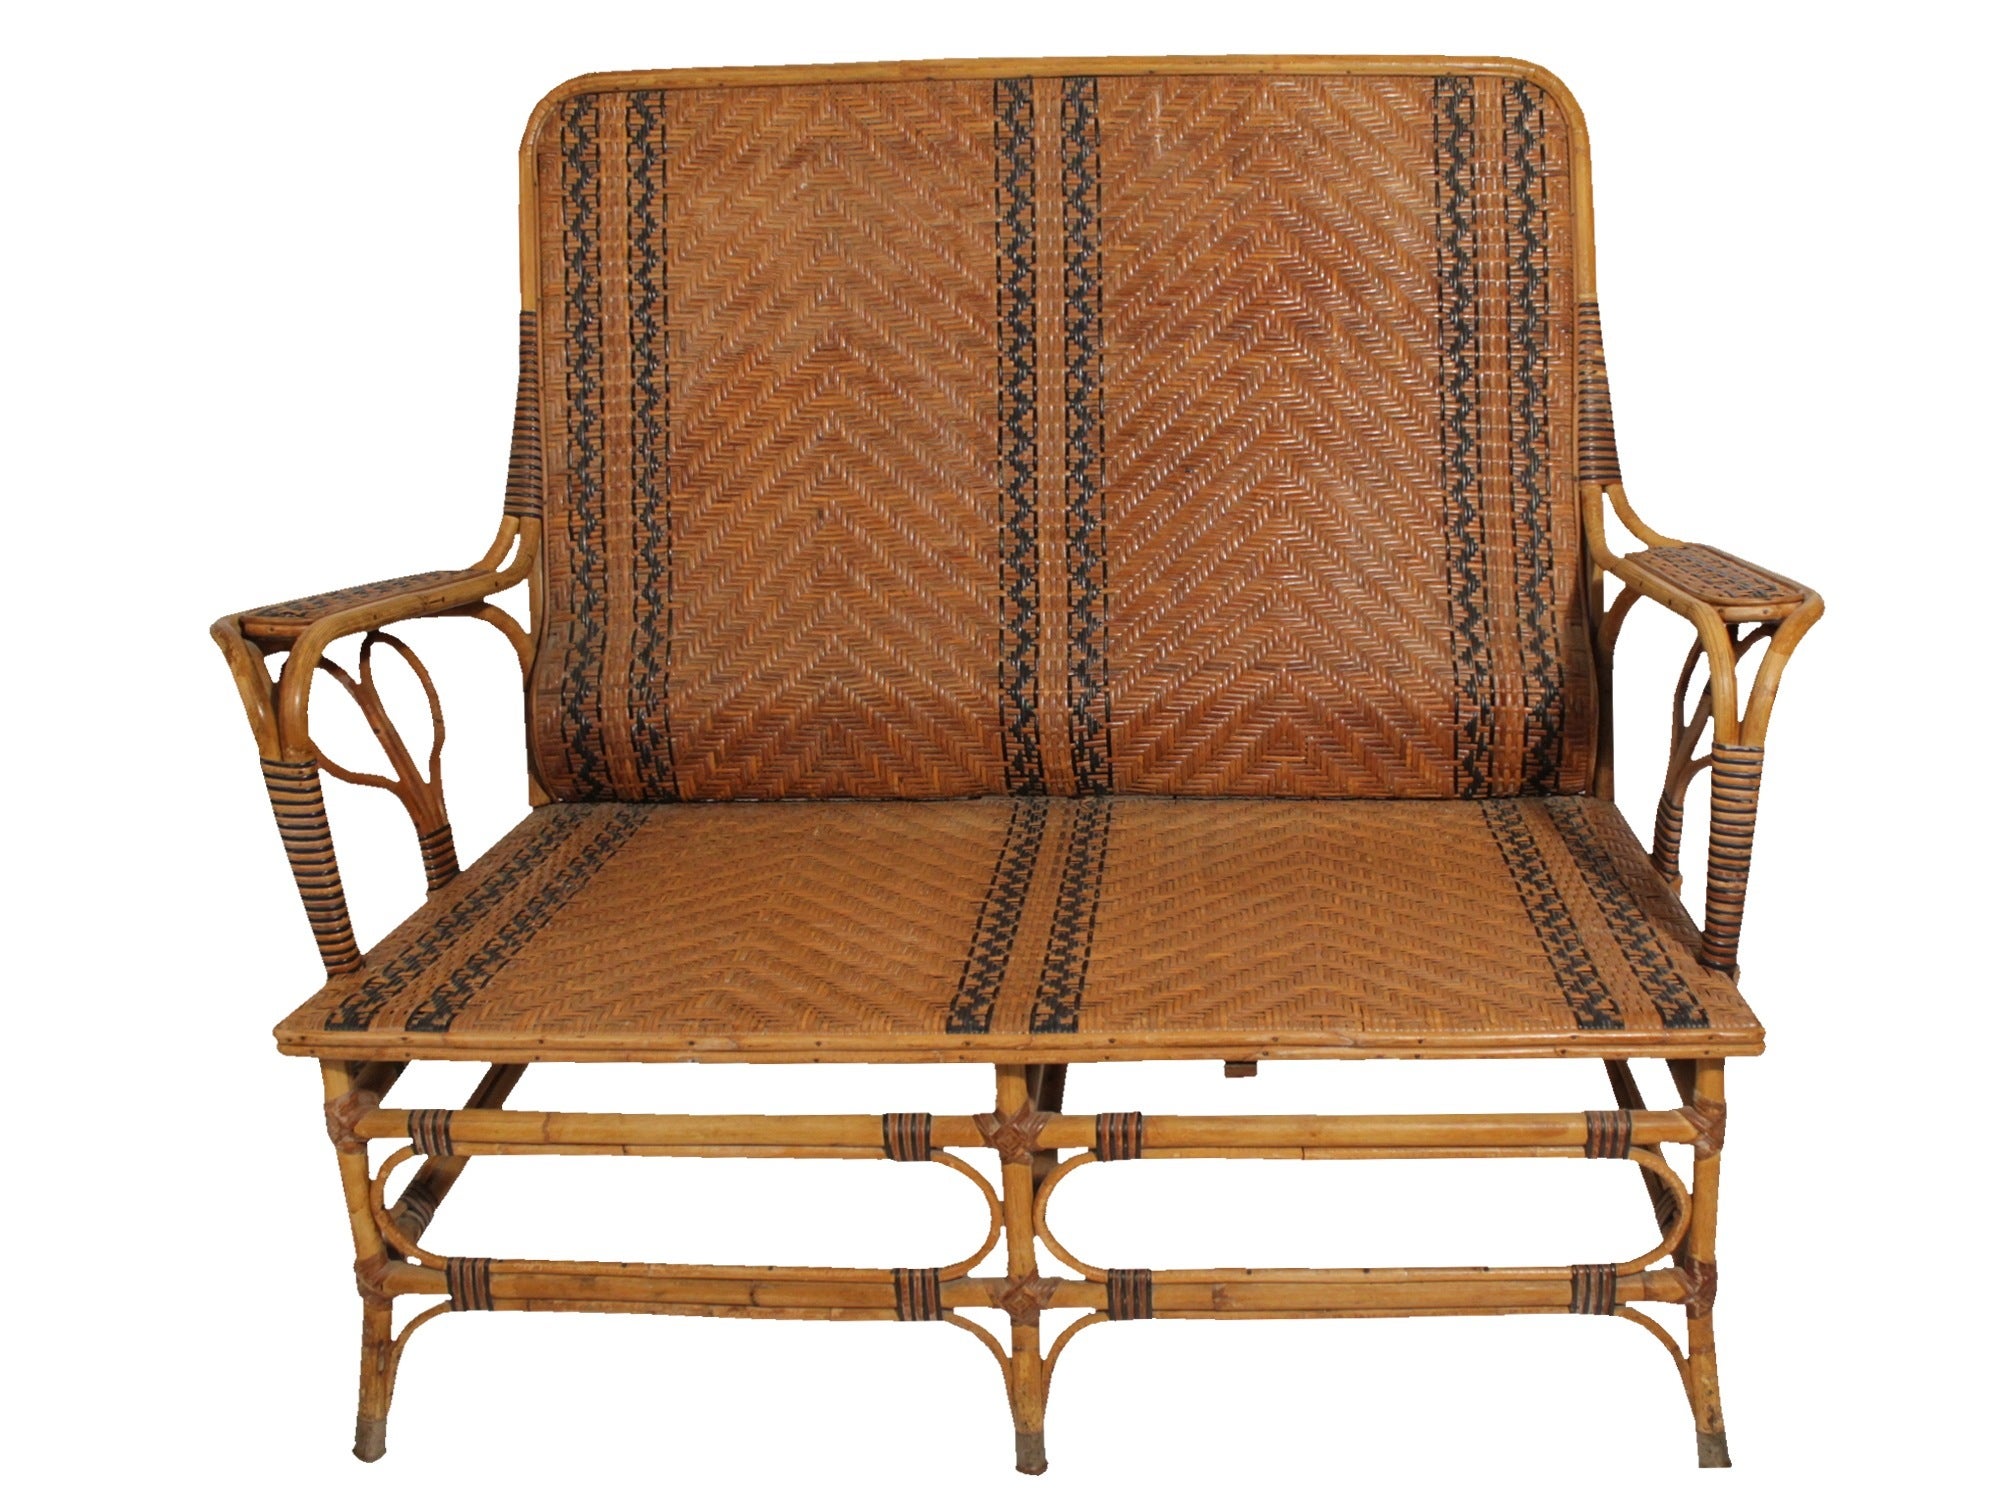 Wicker Table and Armchair from Manufacture Parissien 19th Century